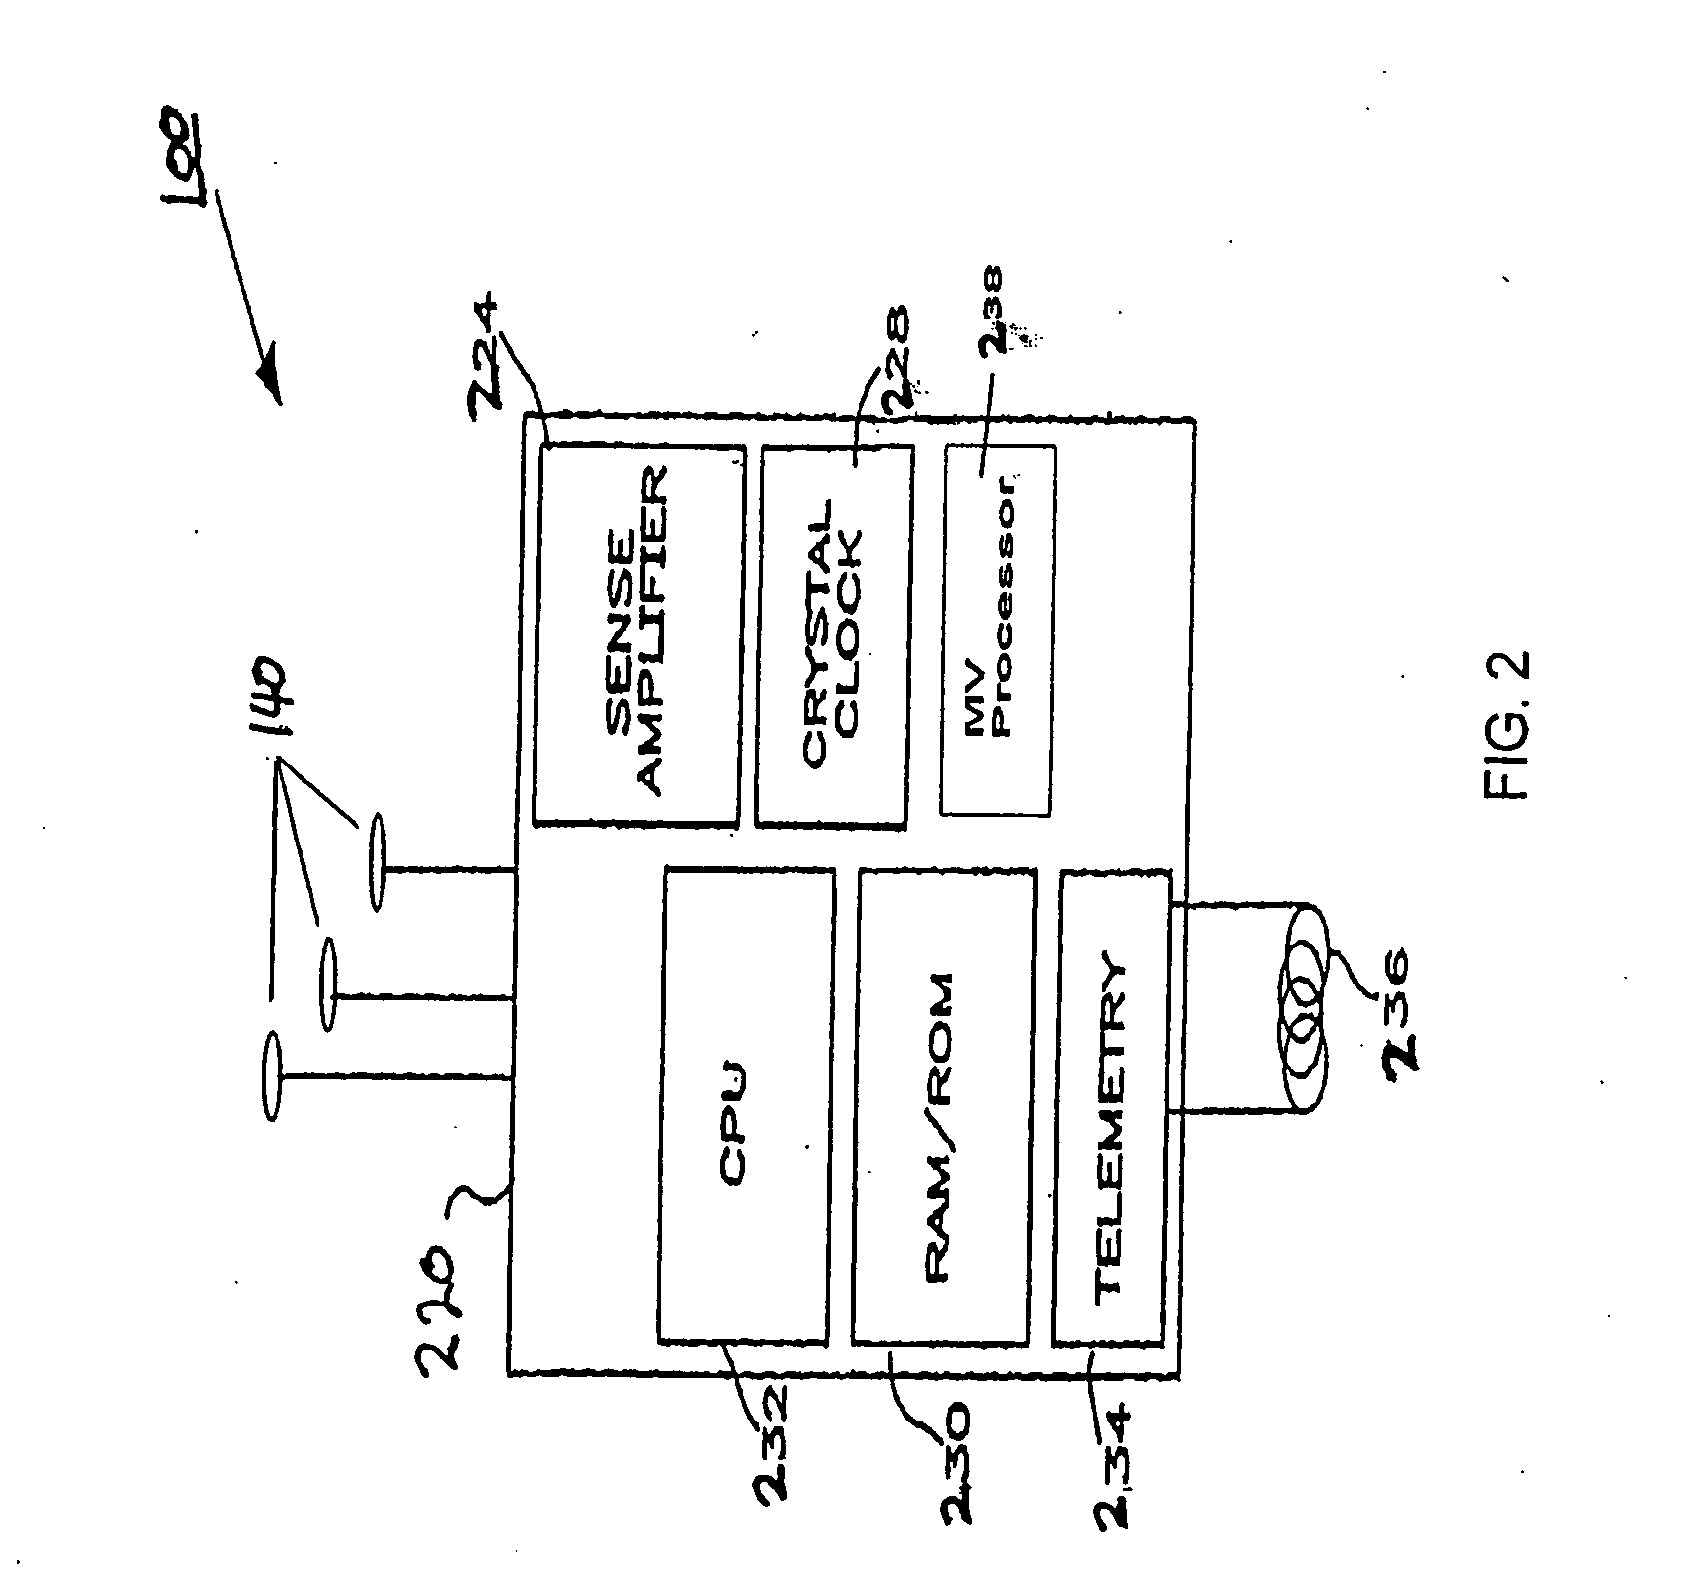 Techniques for selective channel processing and data retention in an implantable medical device